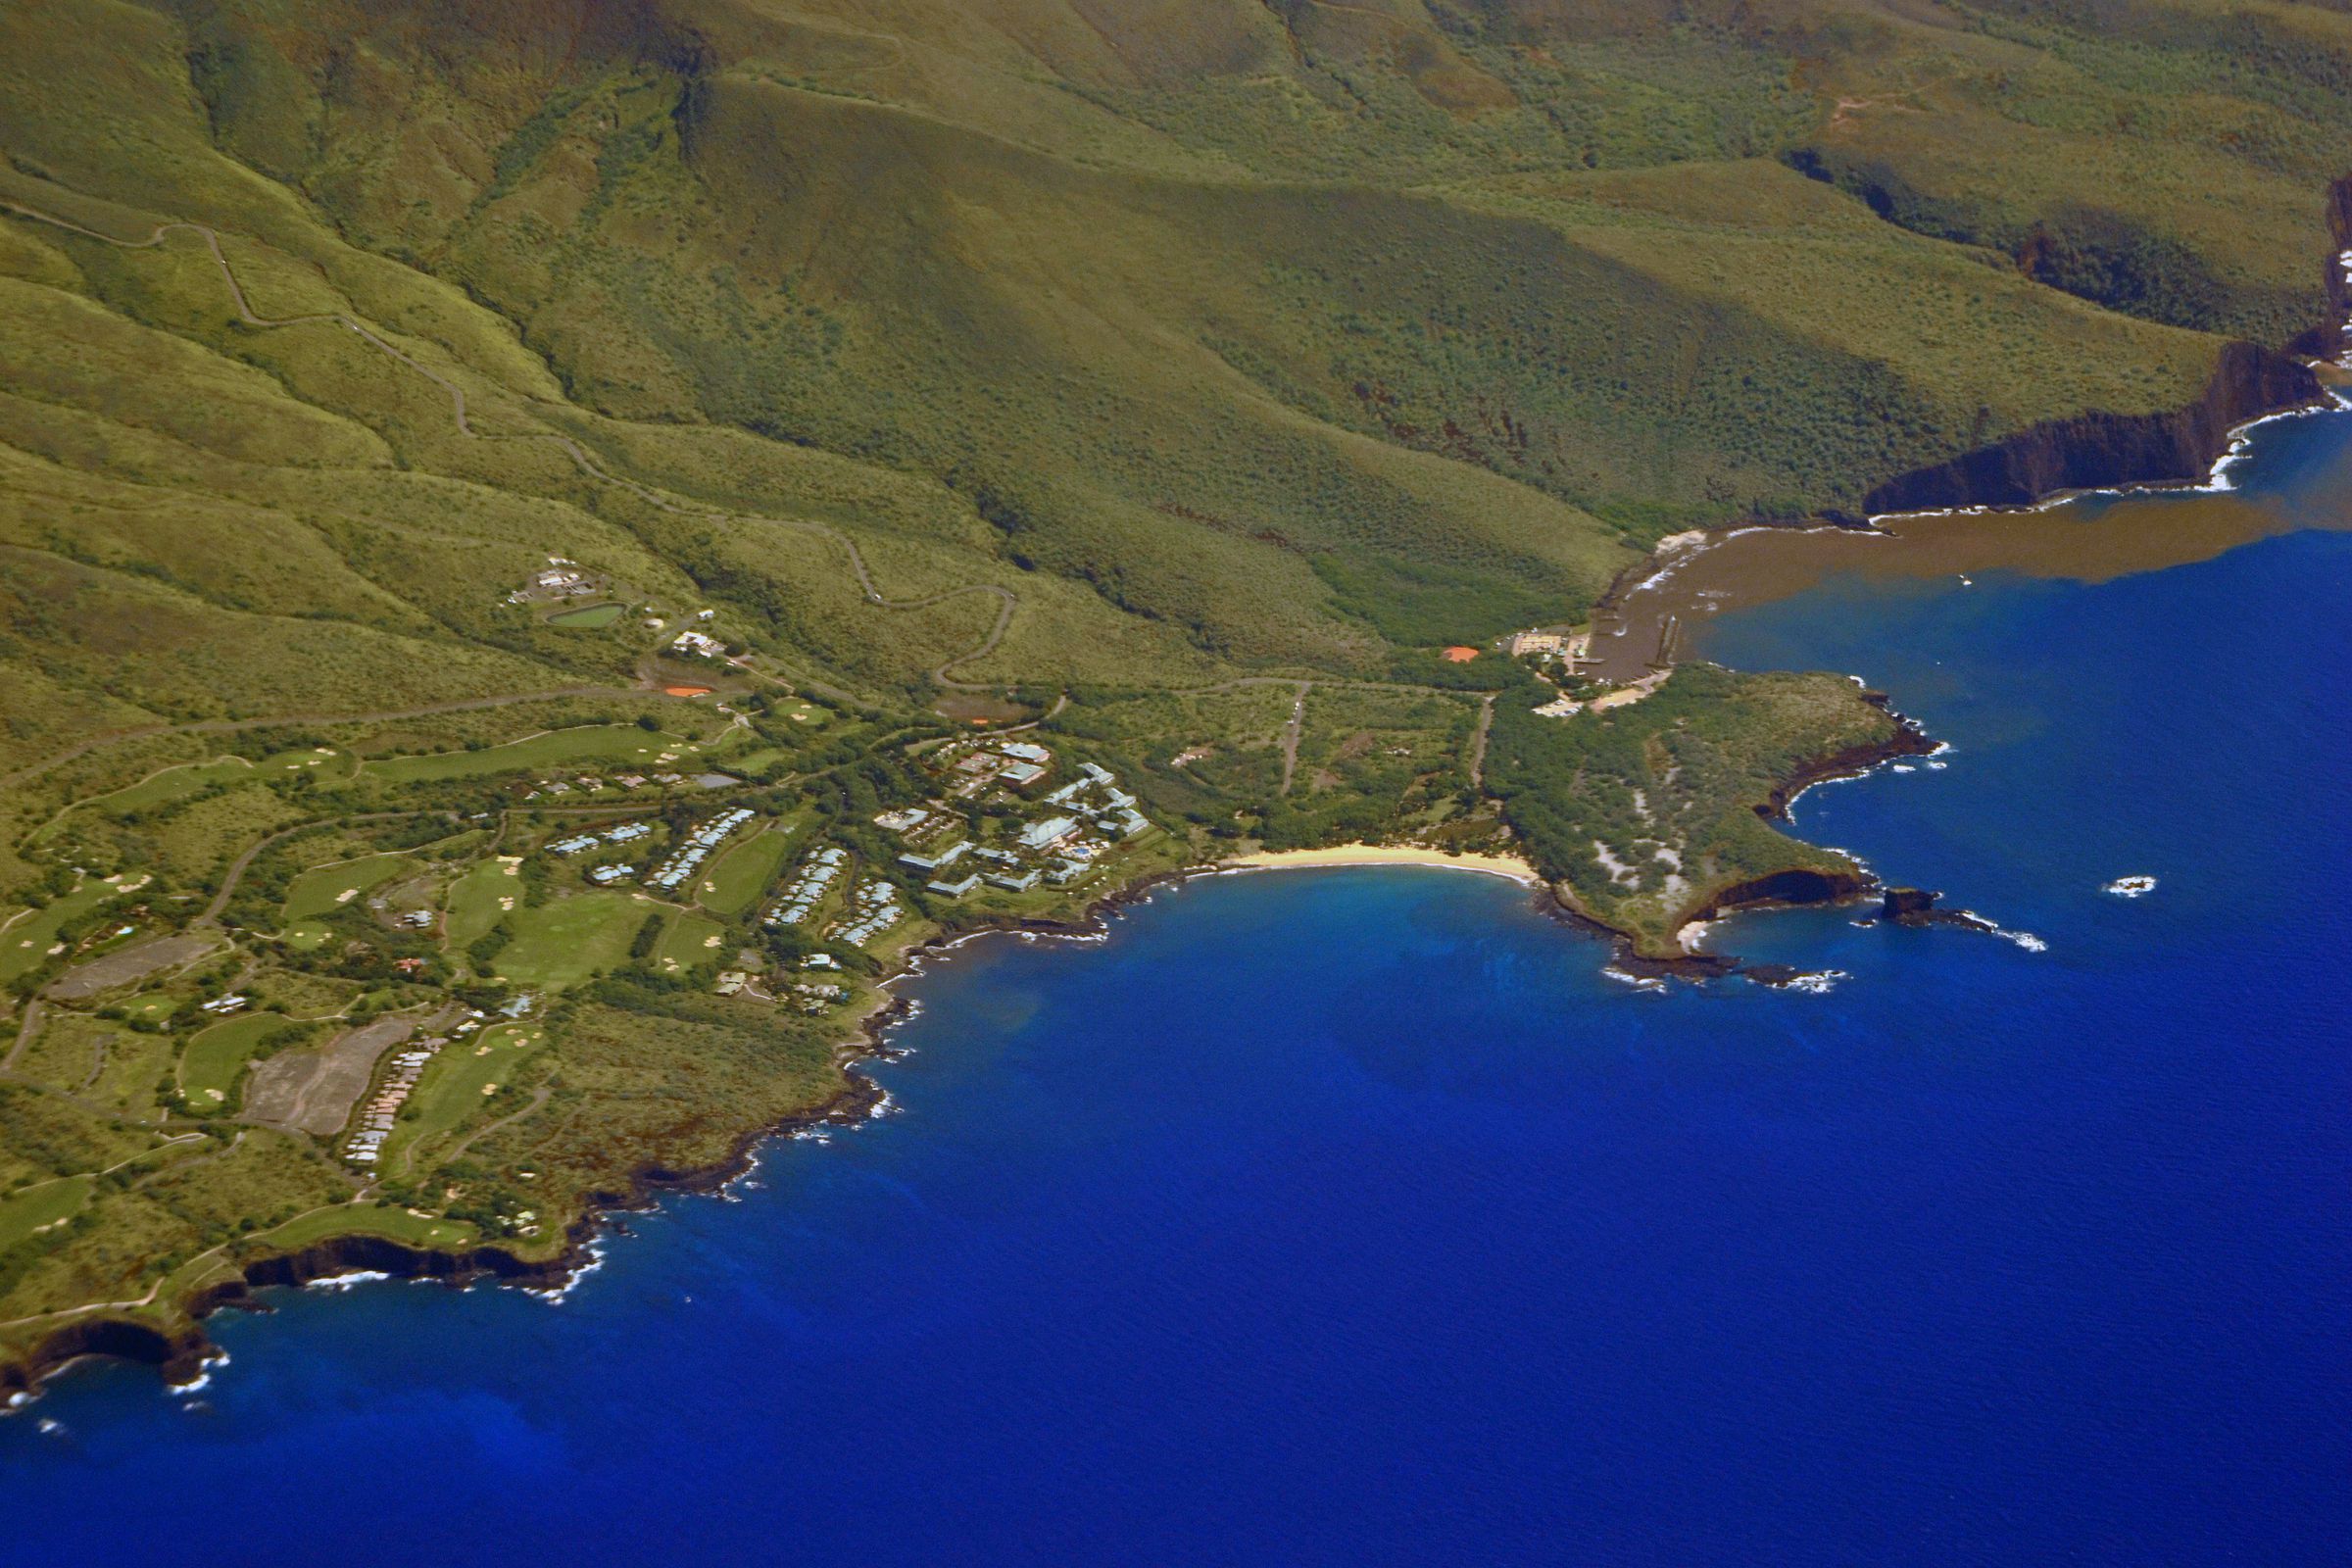 The green island of Lanai seen from above